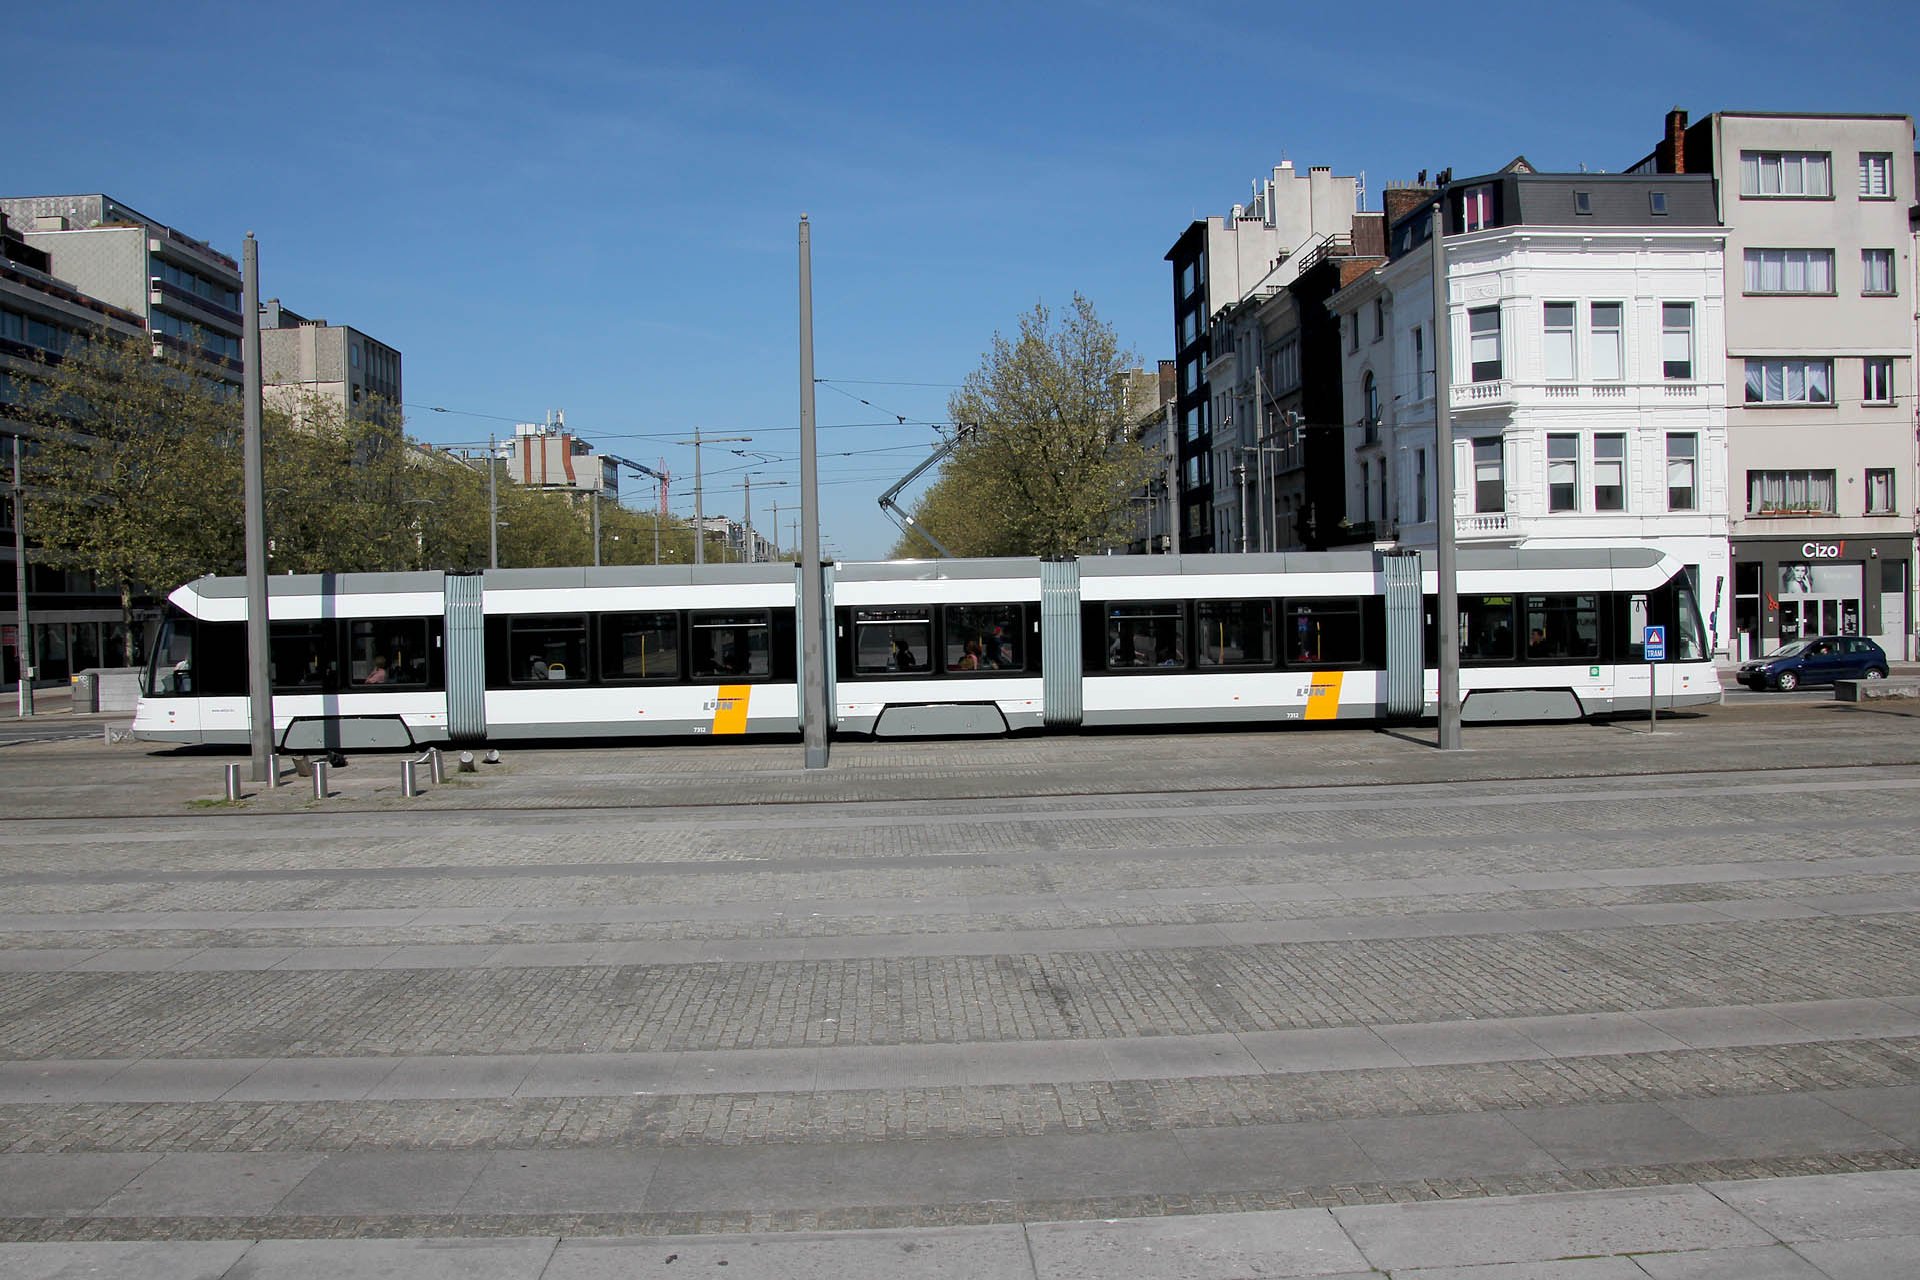 Flexity Outlook2 7312 Fünf Teile, 31,8 m Länge und 2,3 m Breite. Five Sections, 31.8 m long and 2.3 m wide.